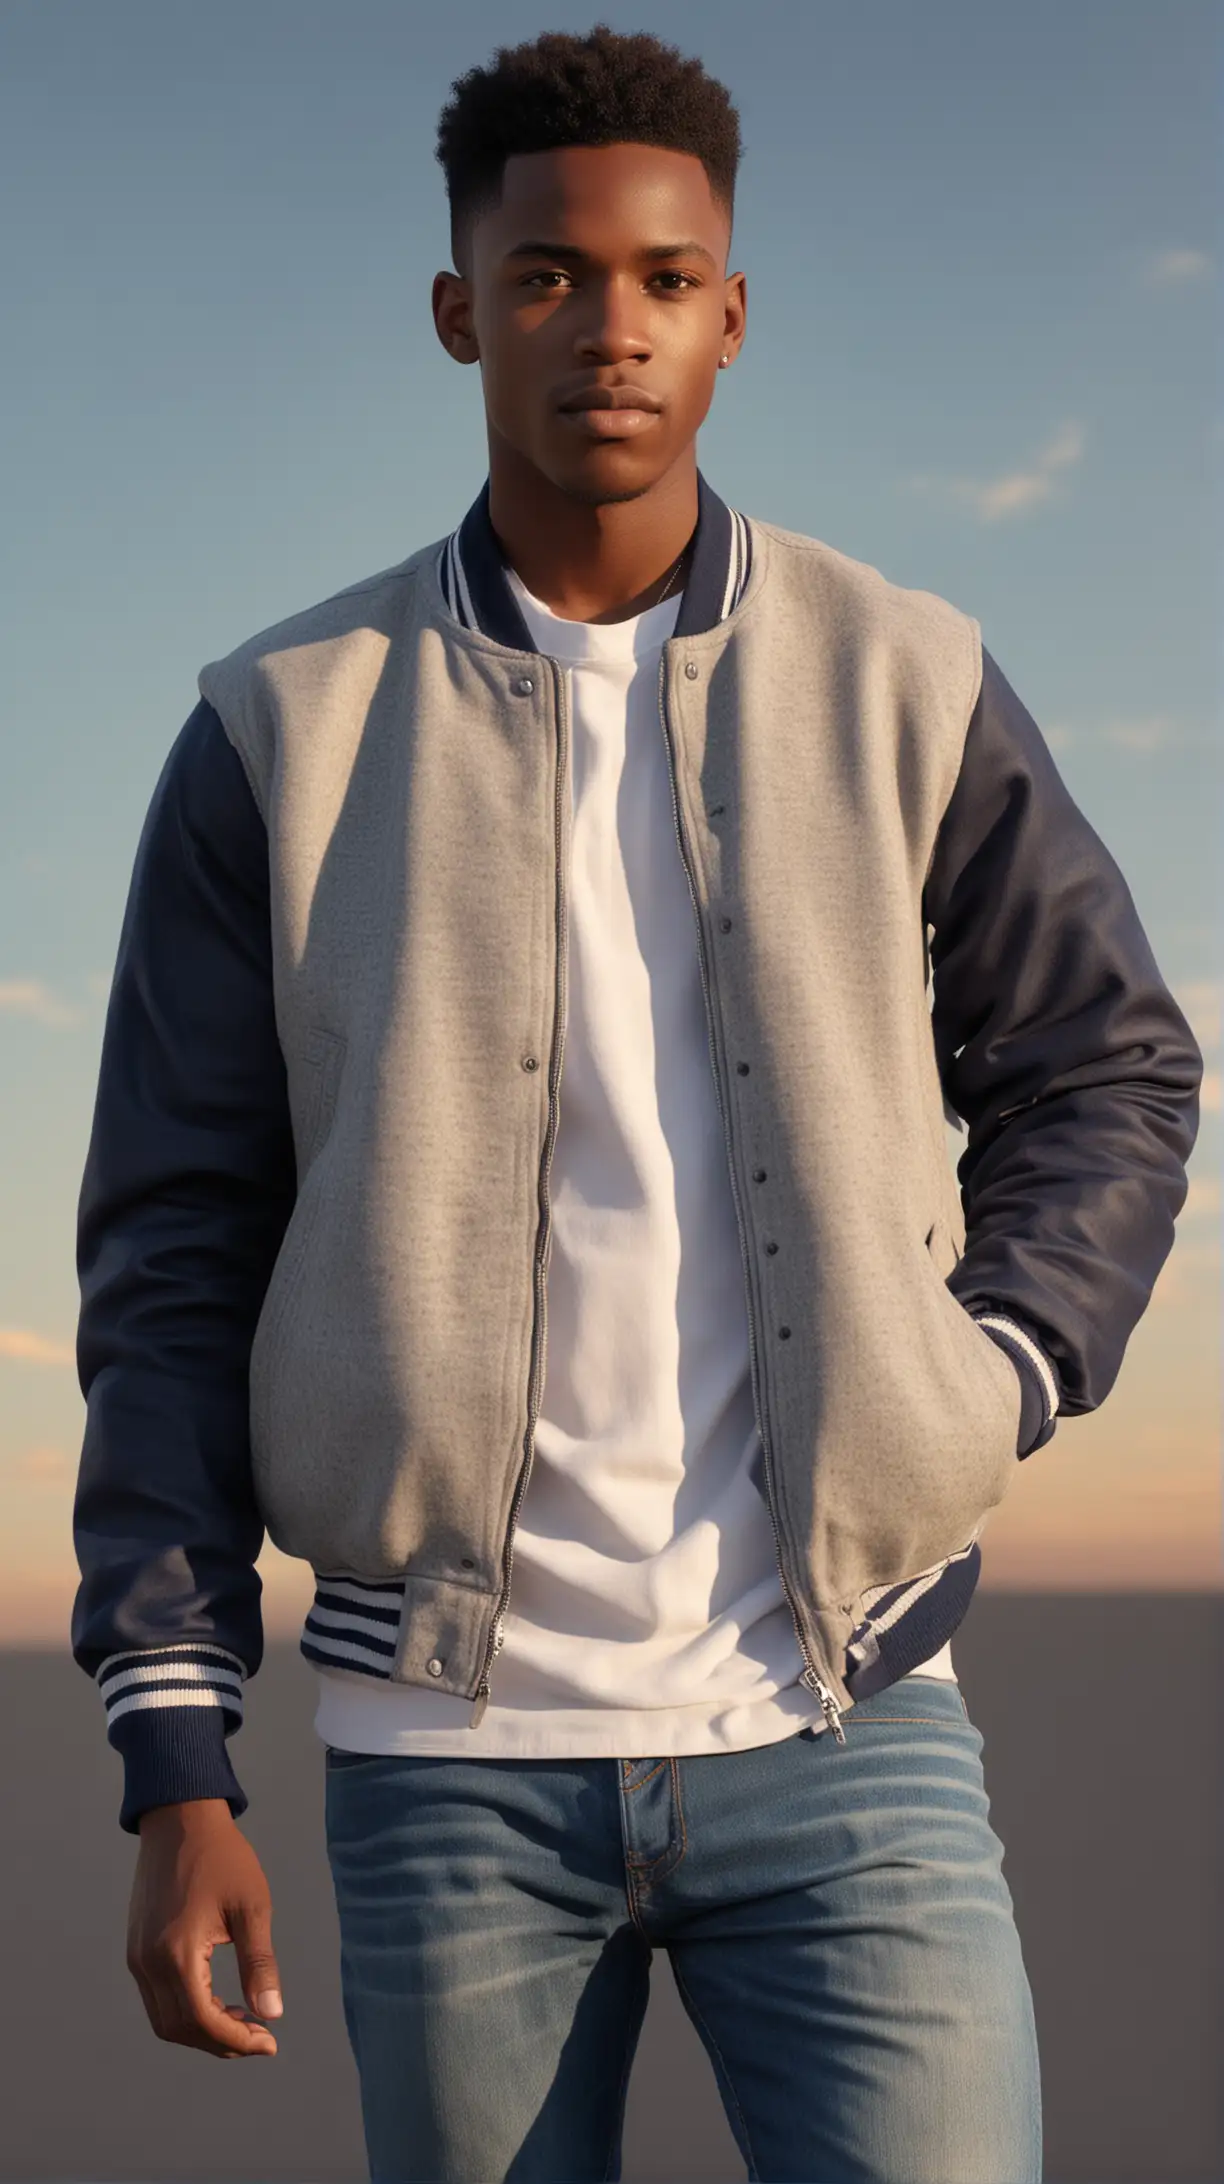 Stylish African American Man in Urban Baseball Jacket and Jeans